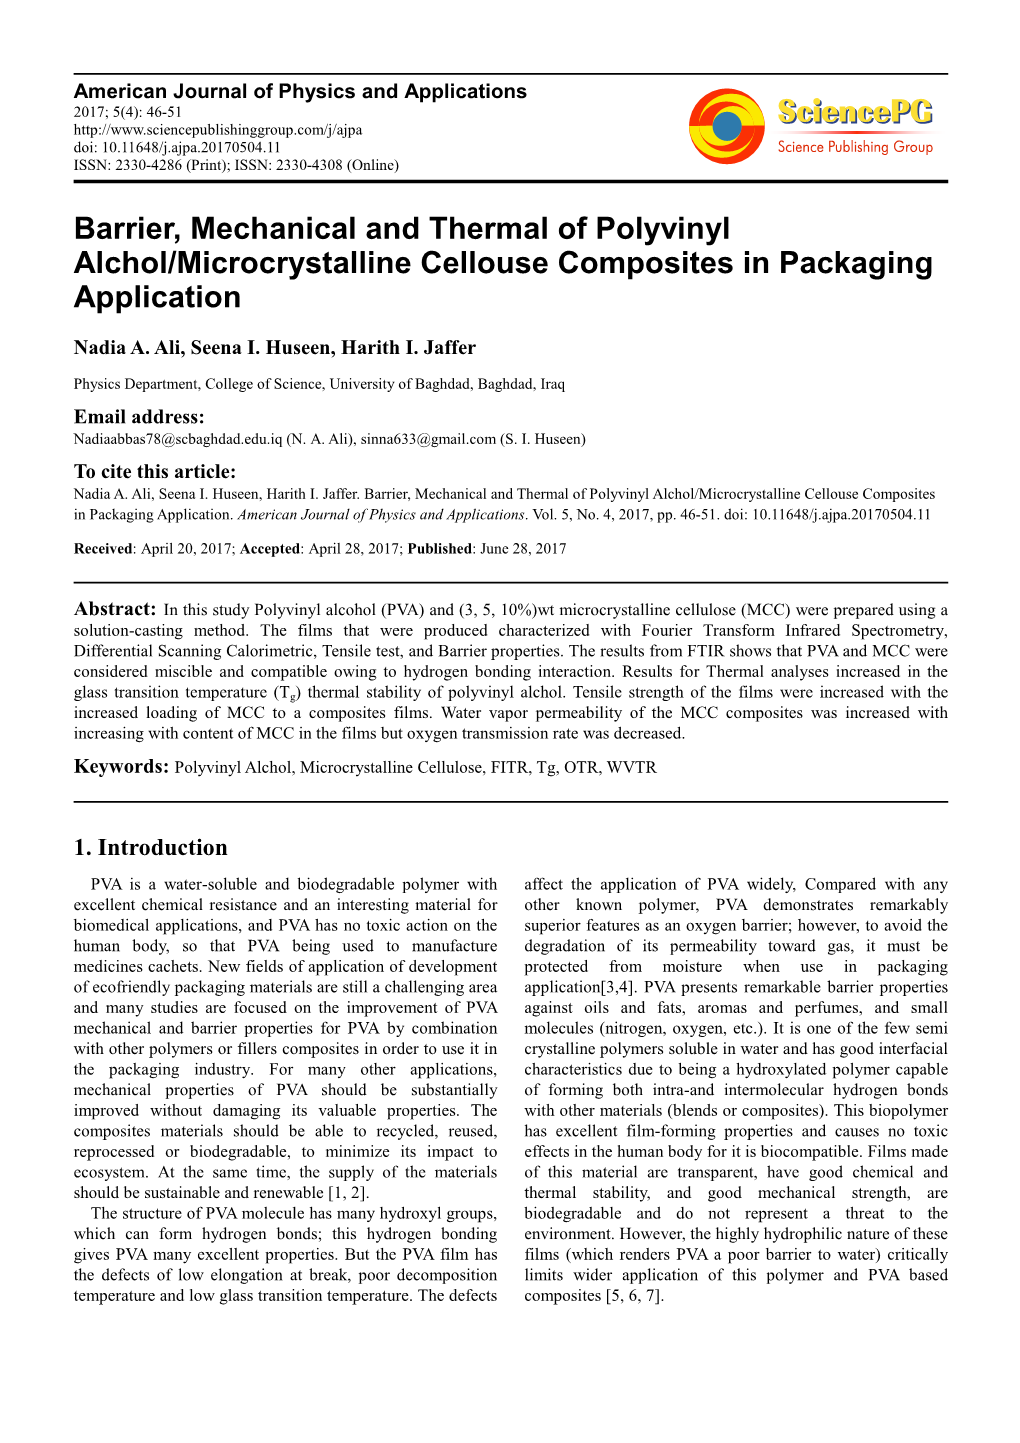 Barrier, Mechanical and Thermal of Polyvinyl Alchol/Microcrystalline Cellouse Composites in Packaging Application